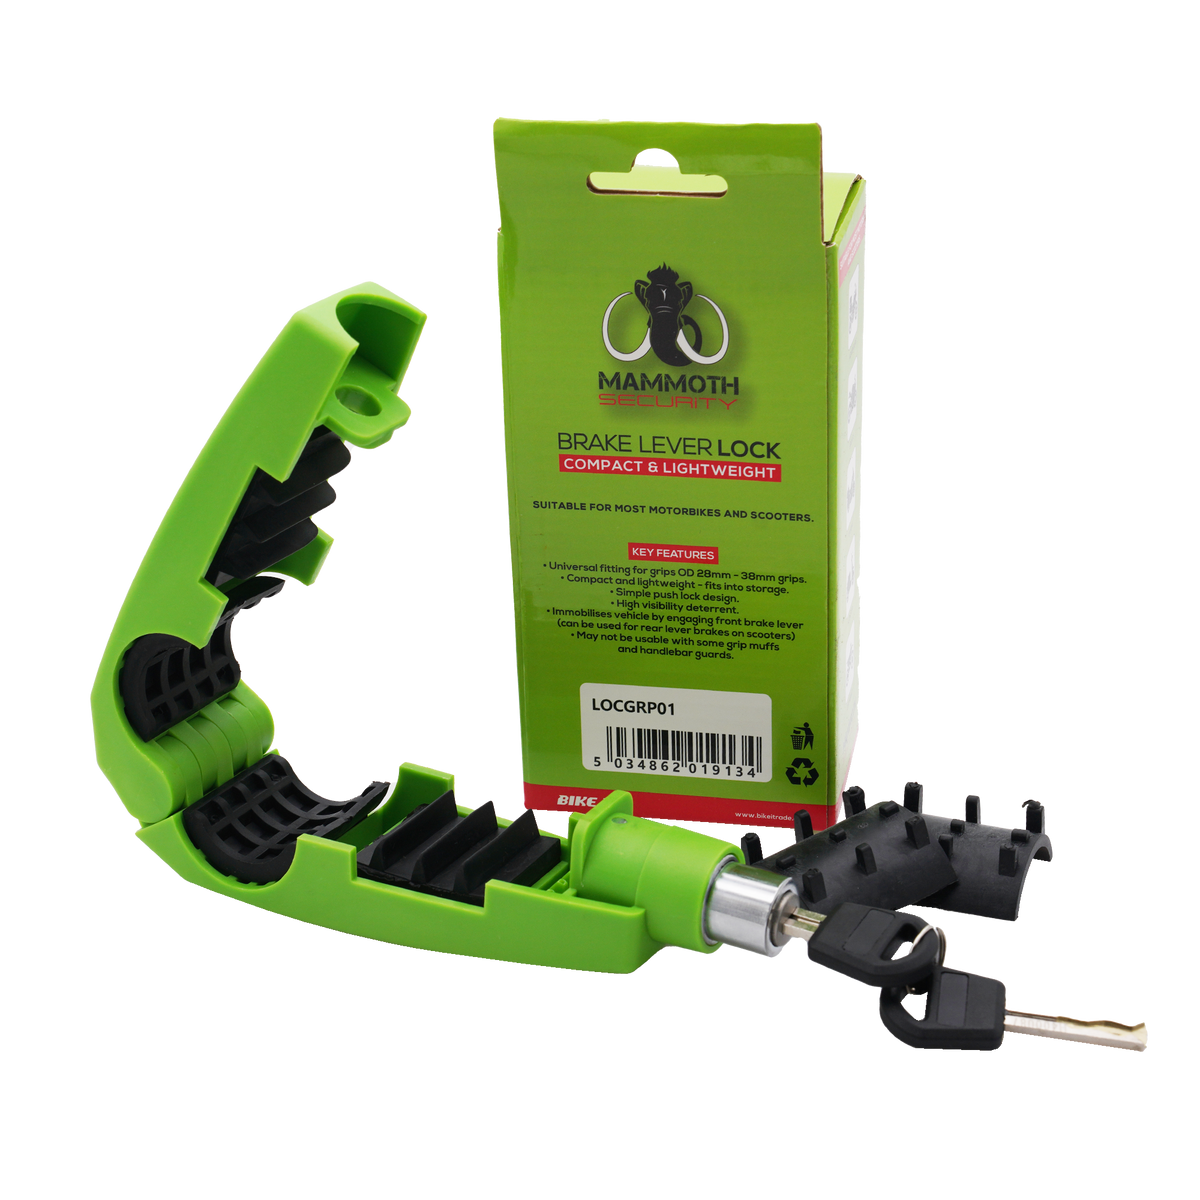 Scooter Motorcycle Motorbike Security Brake Lever Lock Green - Mammoth